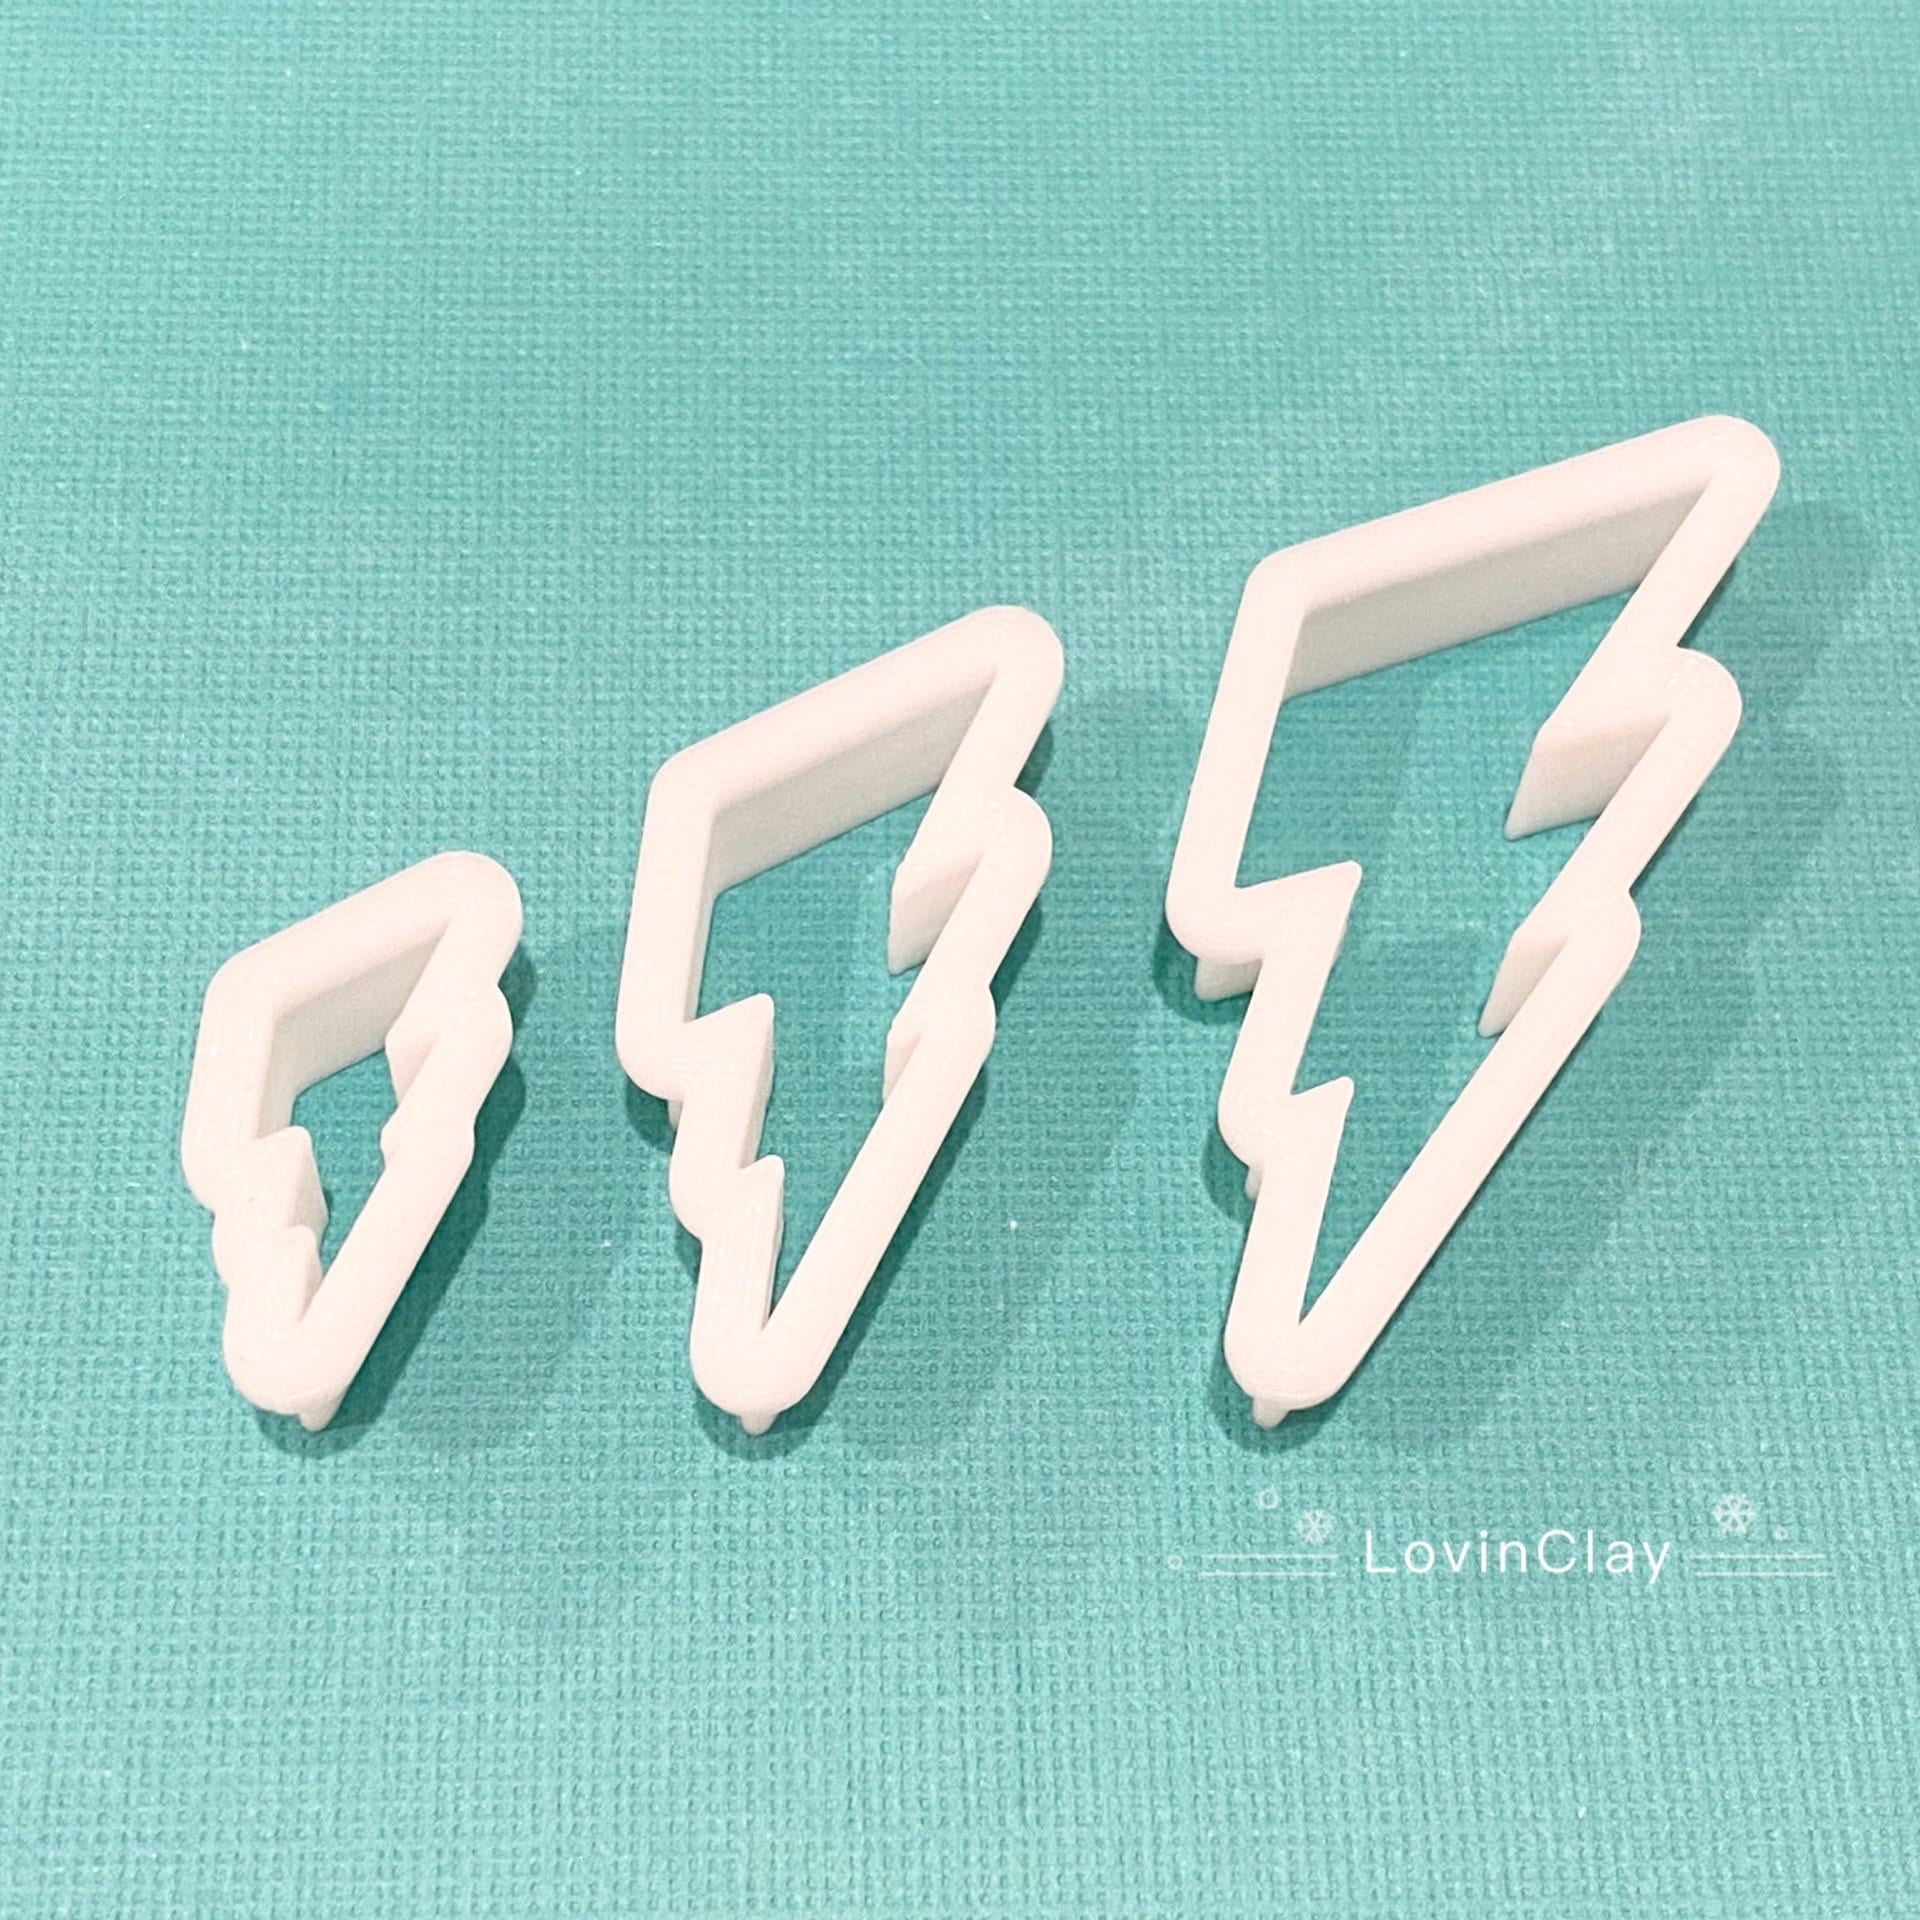 Animal Polymer Clay Earring Cutters, 12 Shapes Animal Clay Cutters for  Polymer Clay Jewelry, Small Polymer Clay Cutters for Earrings Making 